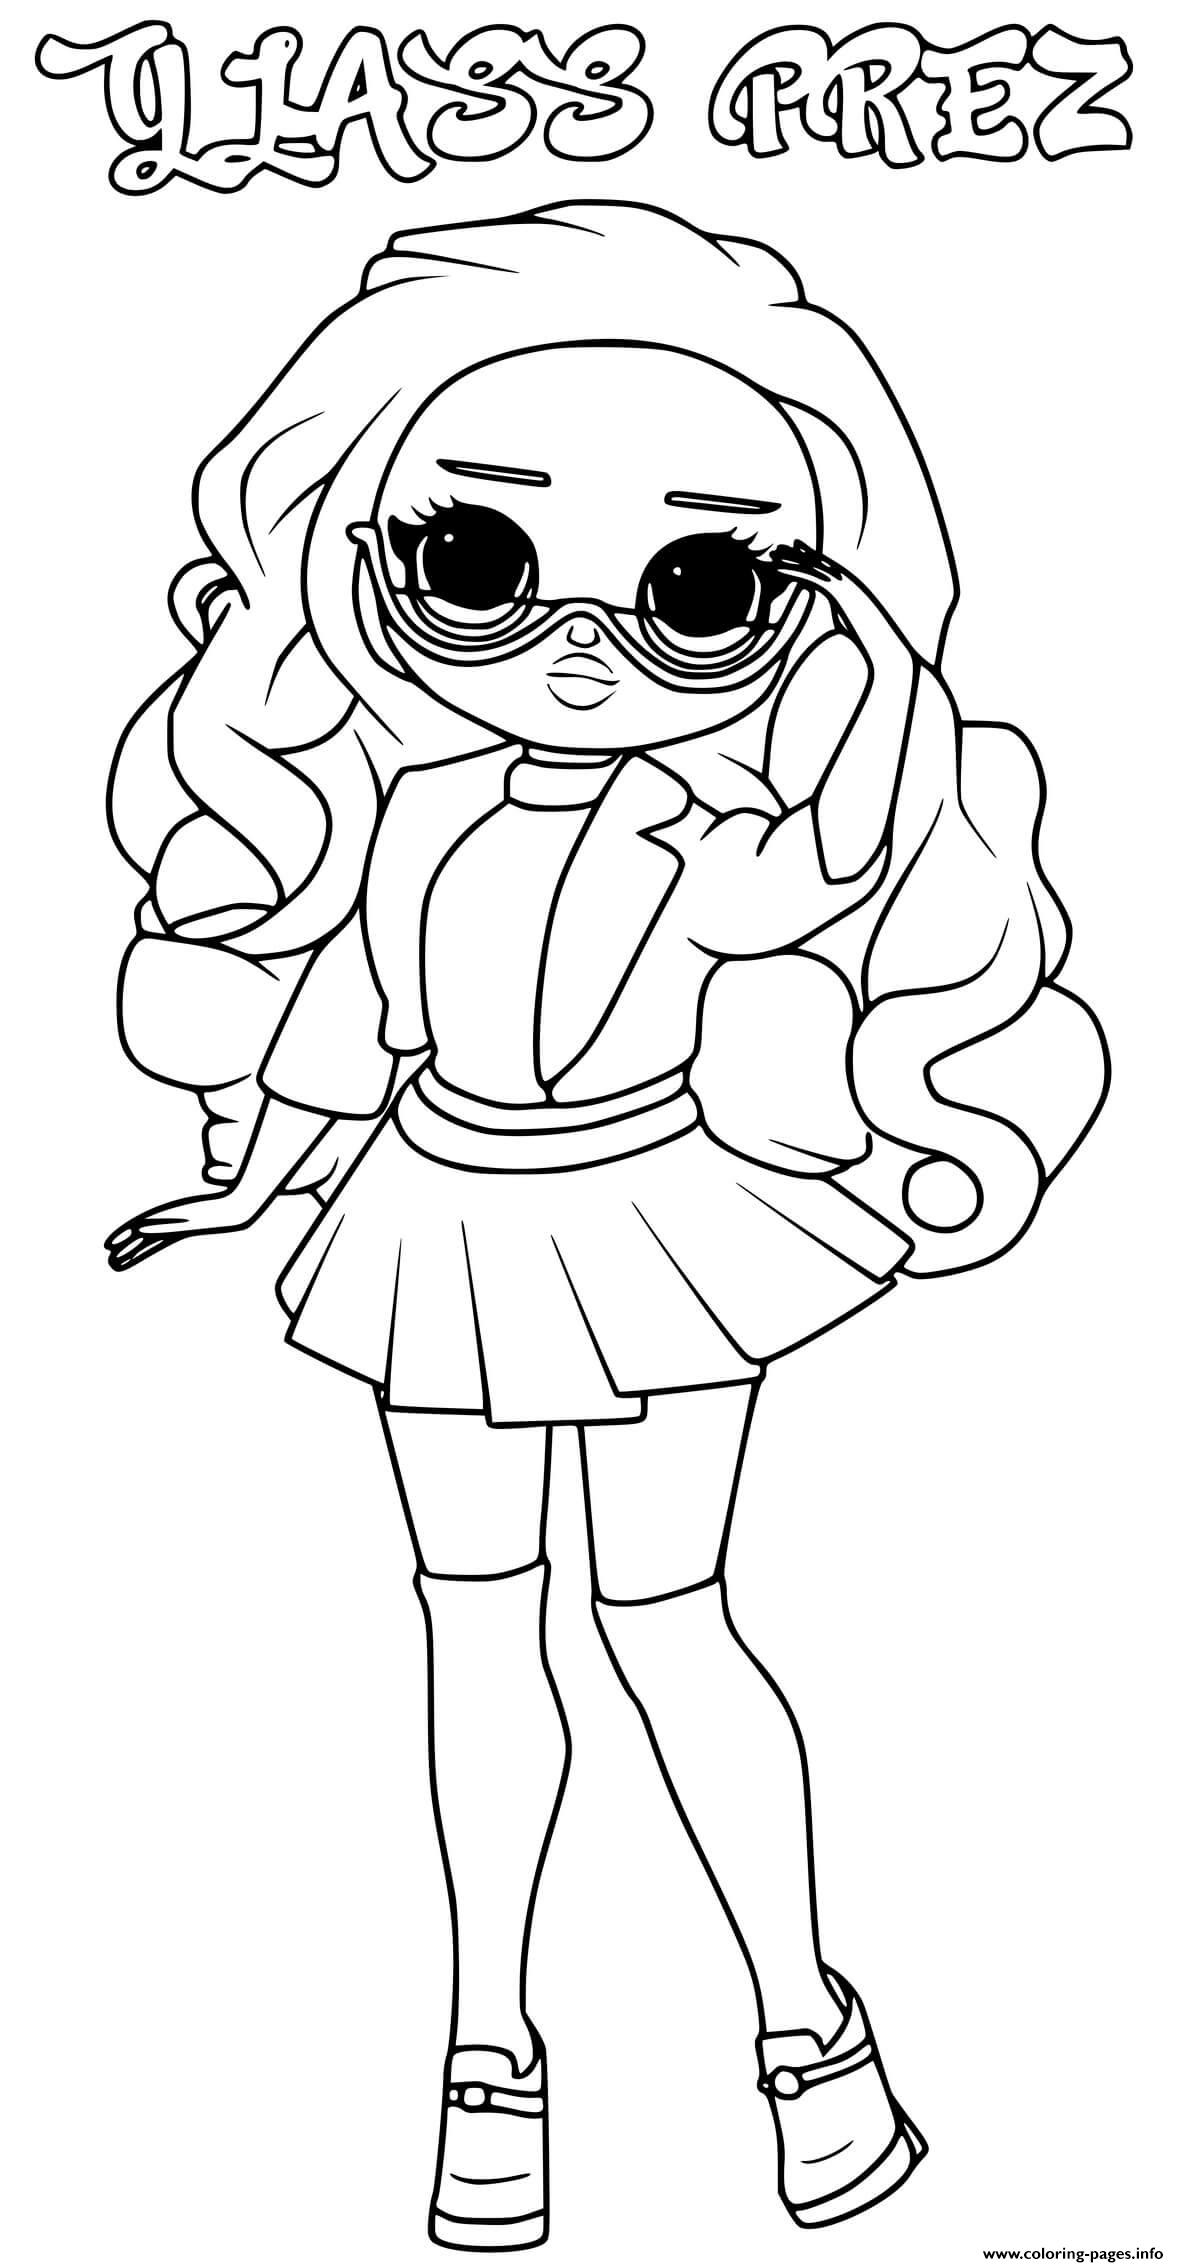 Glass Prez Lol Omg Coloring Pages Printable